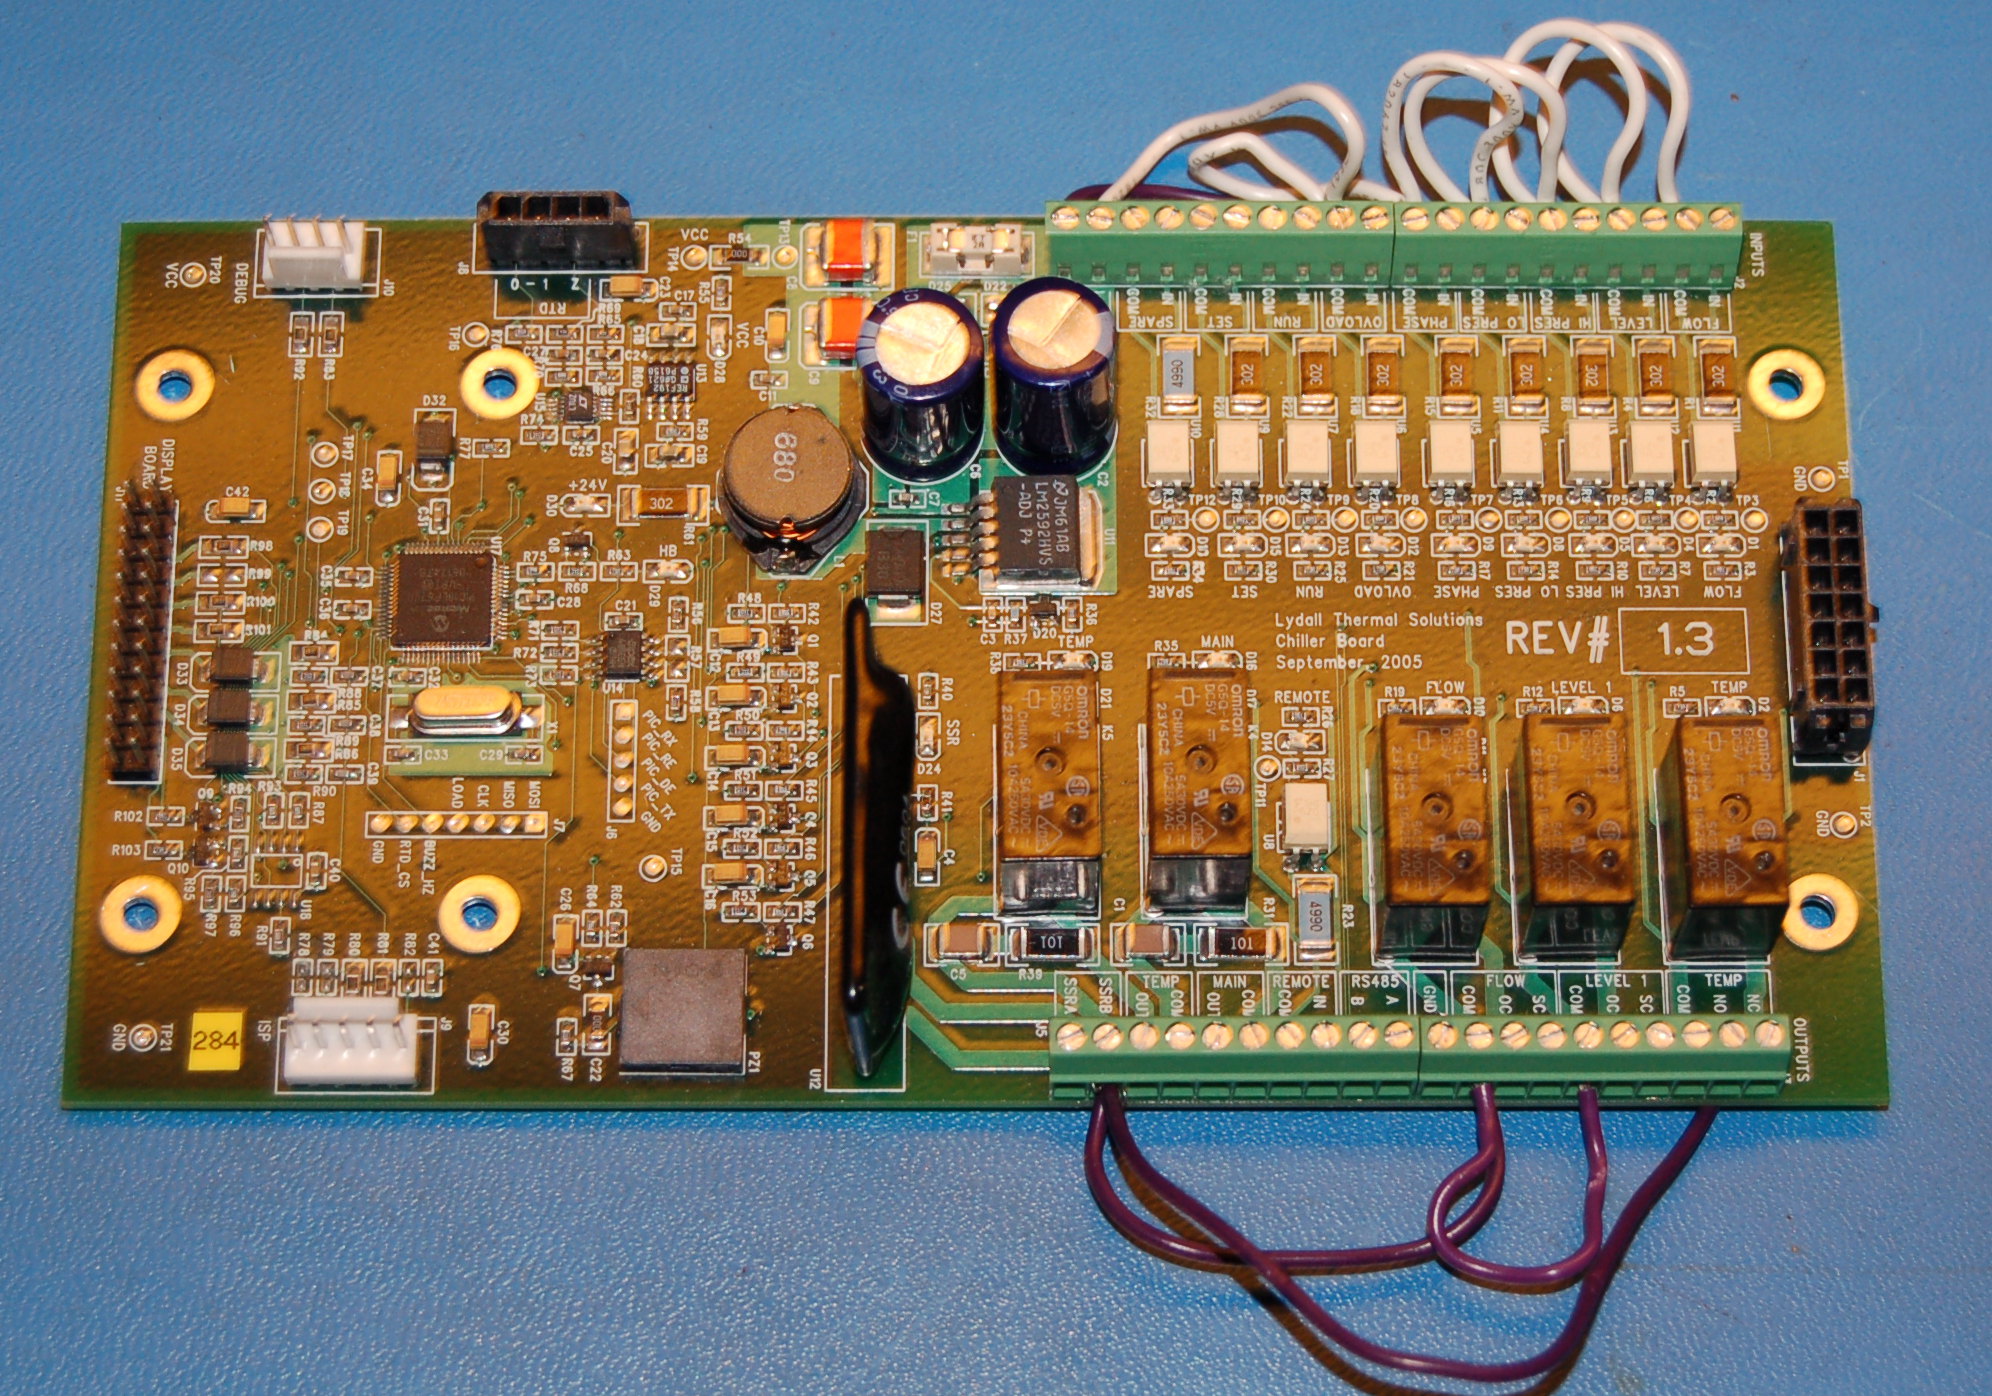 Lydall Controller Chiller Main Logic Board Rev. 1.3 - Click Image to Close